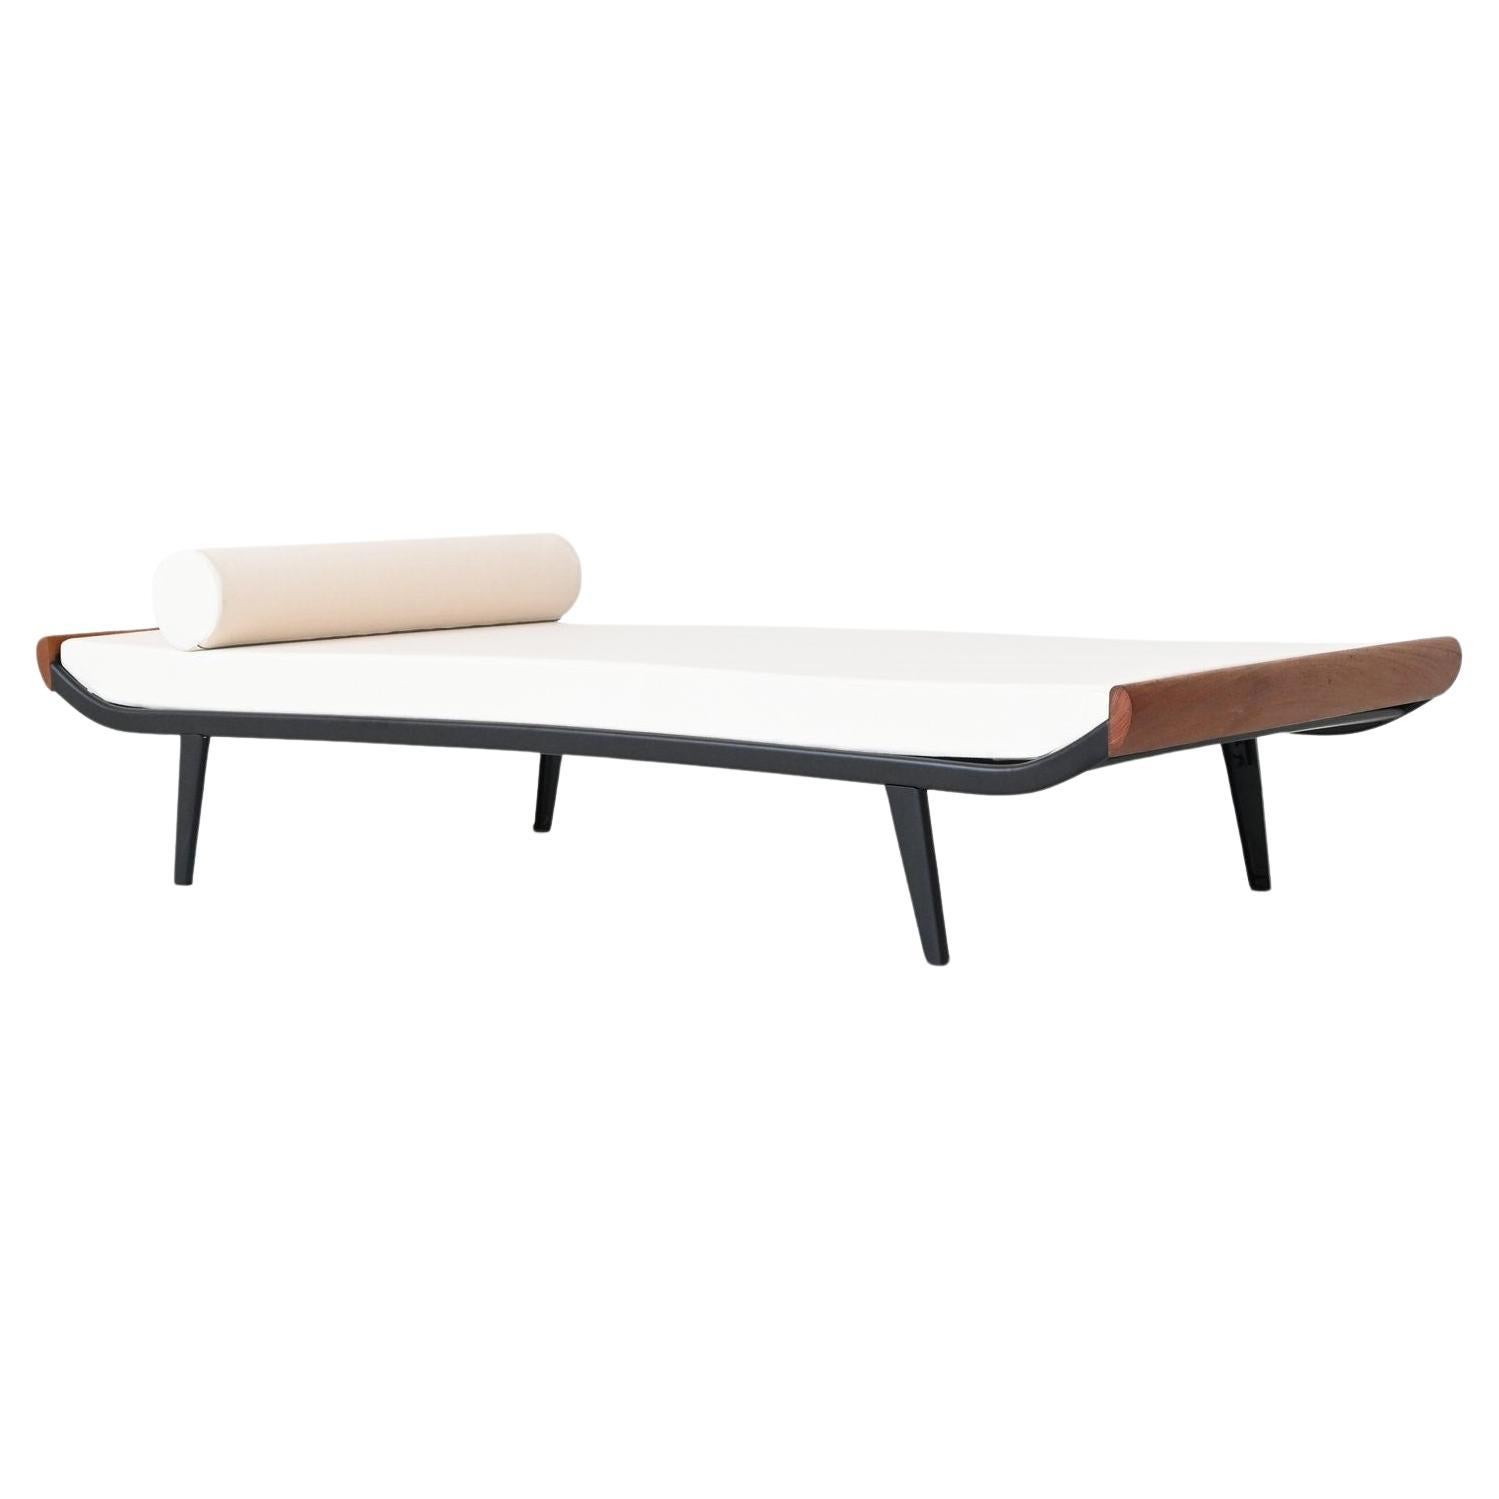 Dick Cordemeijer Cleopatra daybed in linen Auping The Netherlands 1954 For Sale